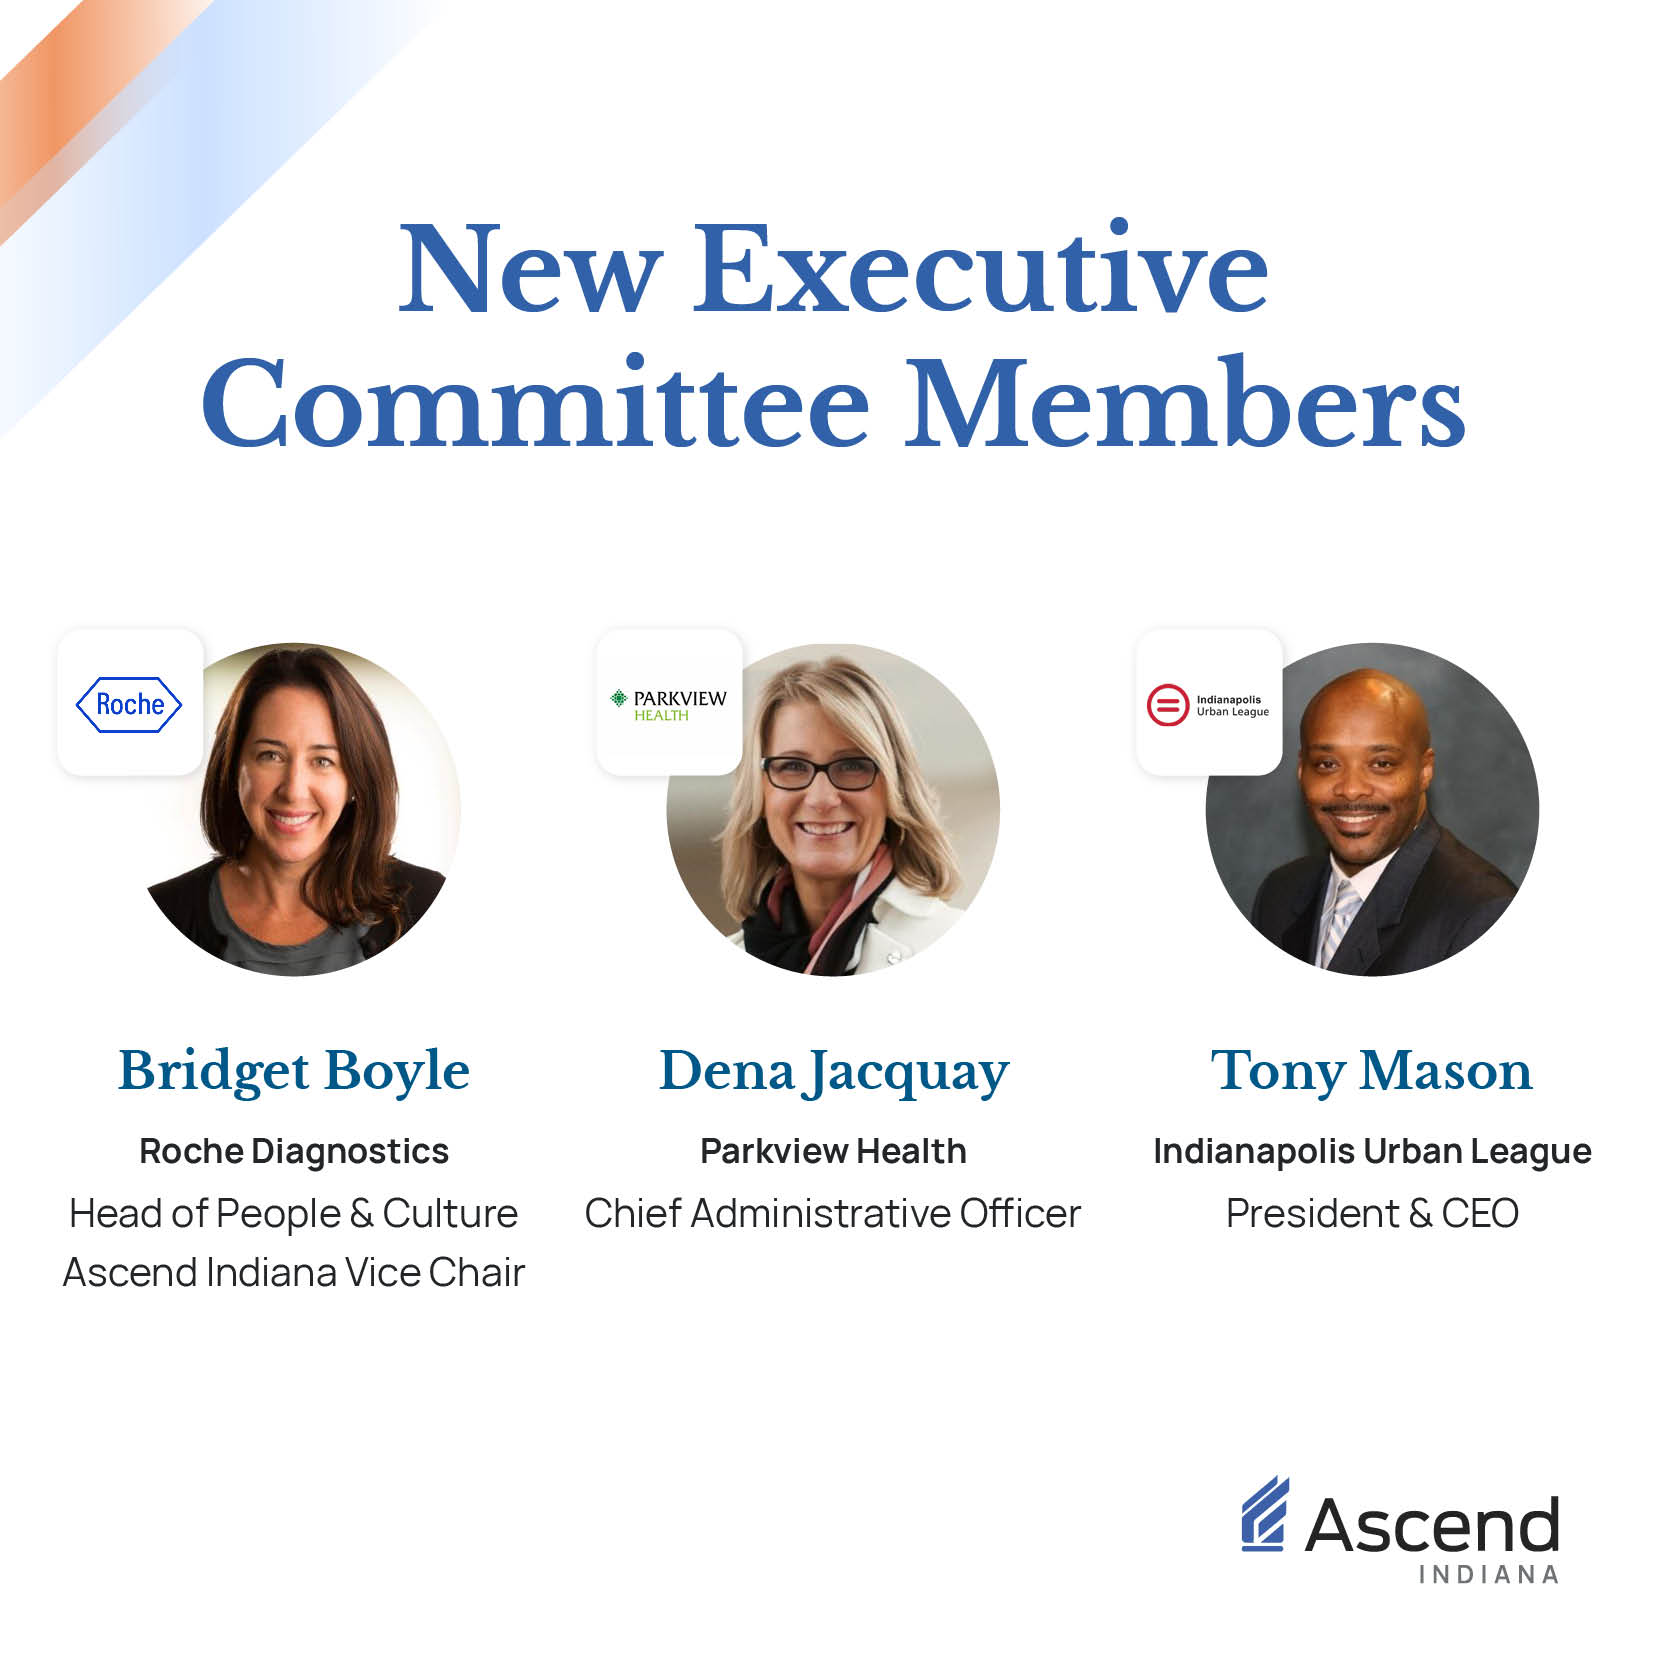 Ascend Indiana makes additions to its Executive Committee